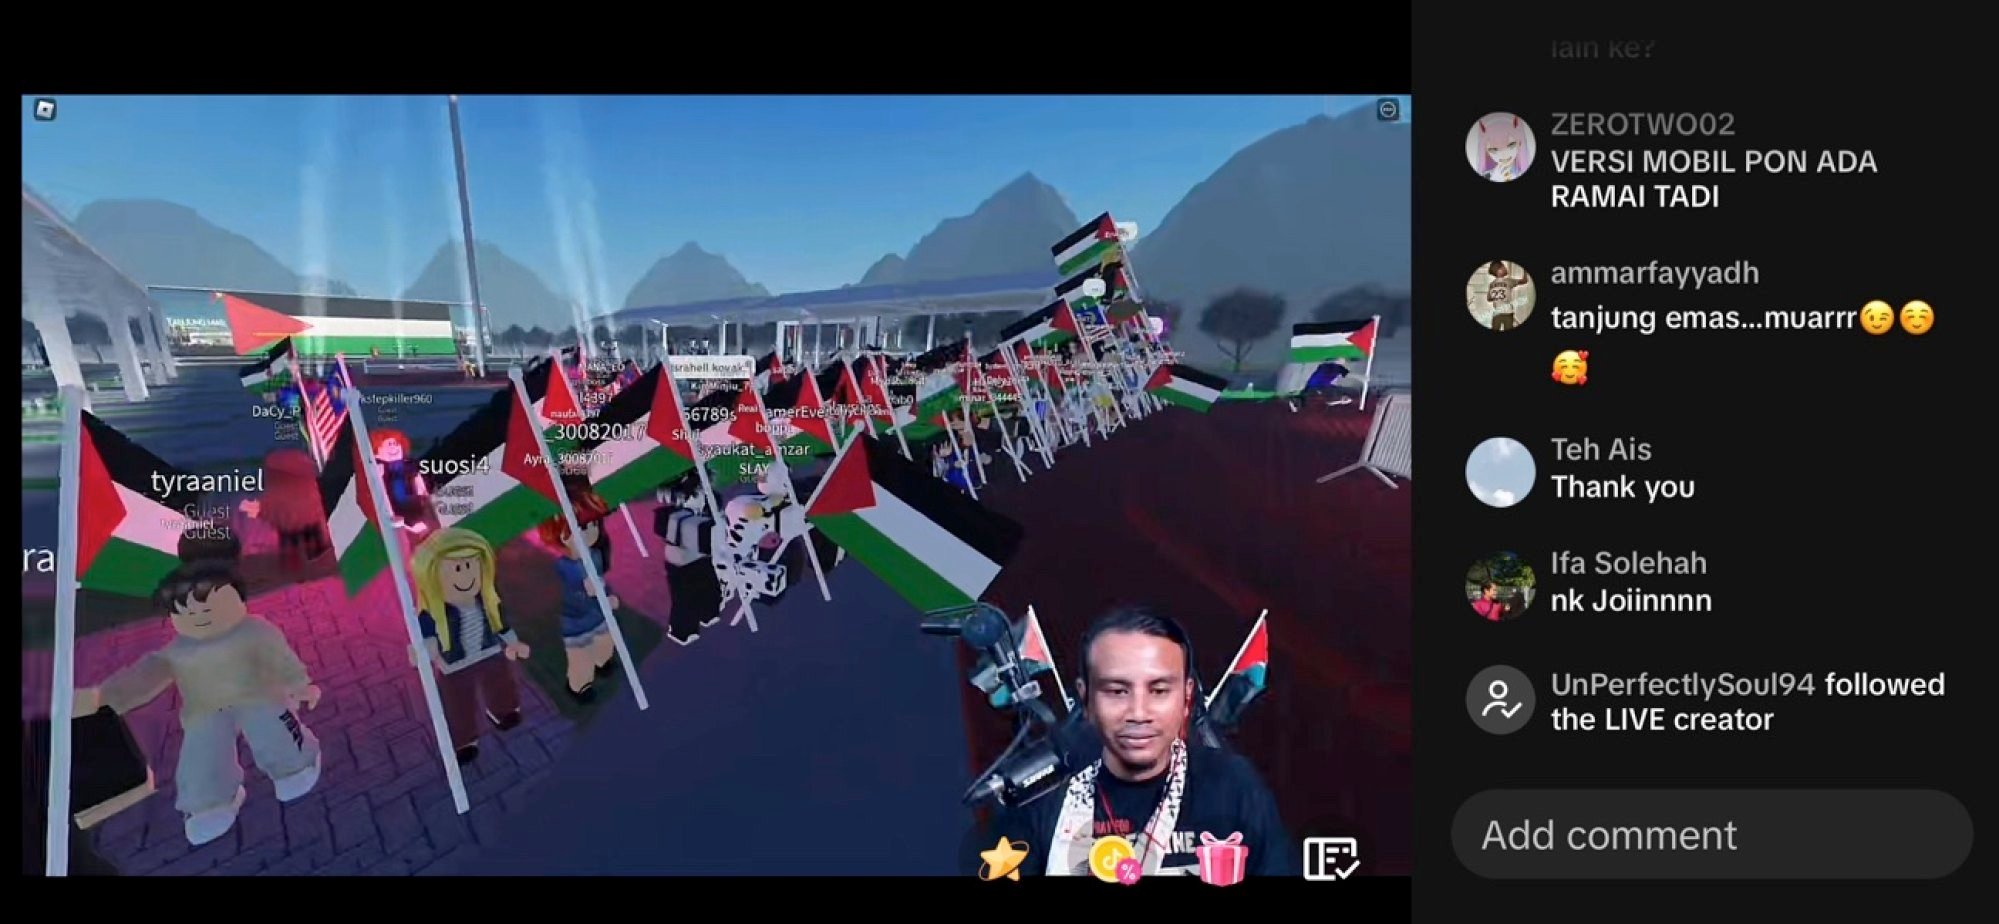 The Roblox - Israel Connection Unraveled - Mayniaga